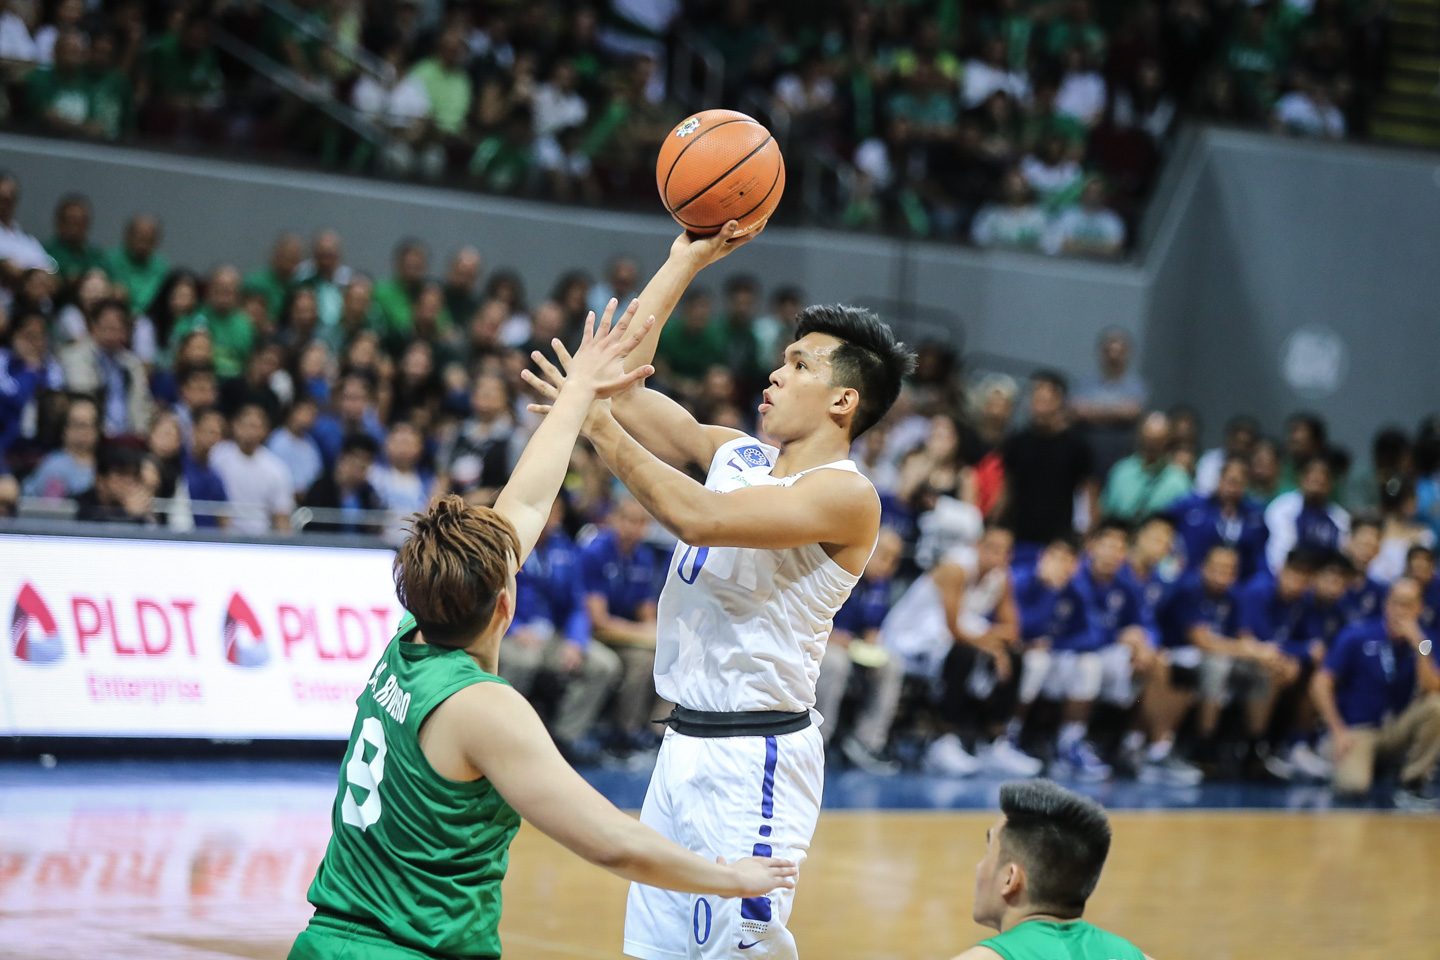 Blue Eagles remain unbeaten, defeat La Salle on late free throws